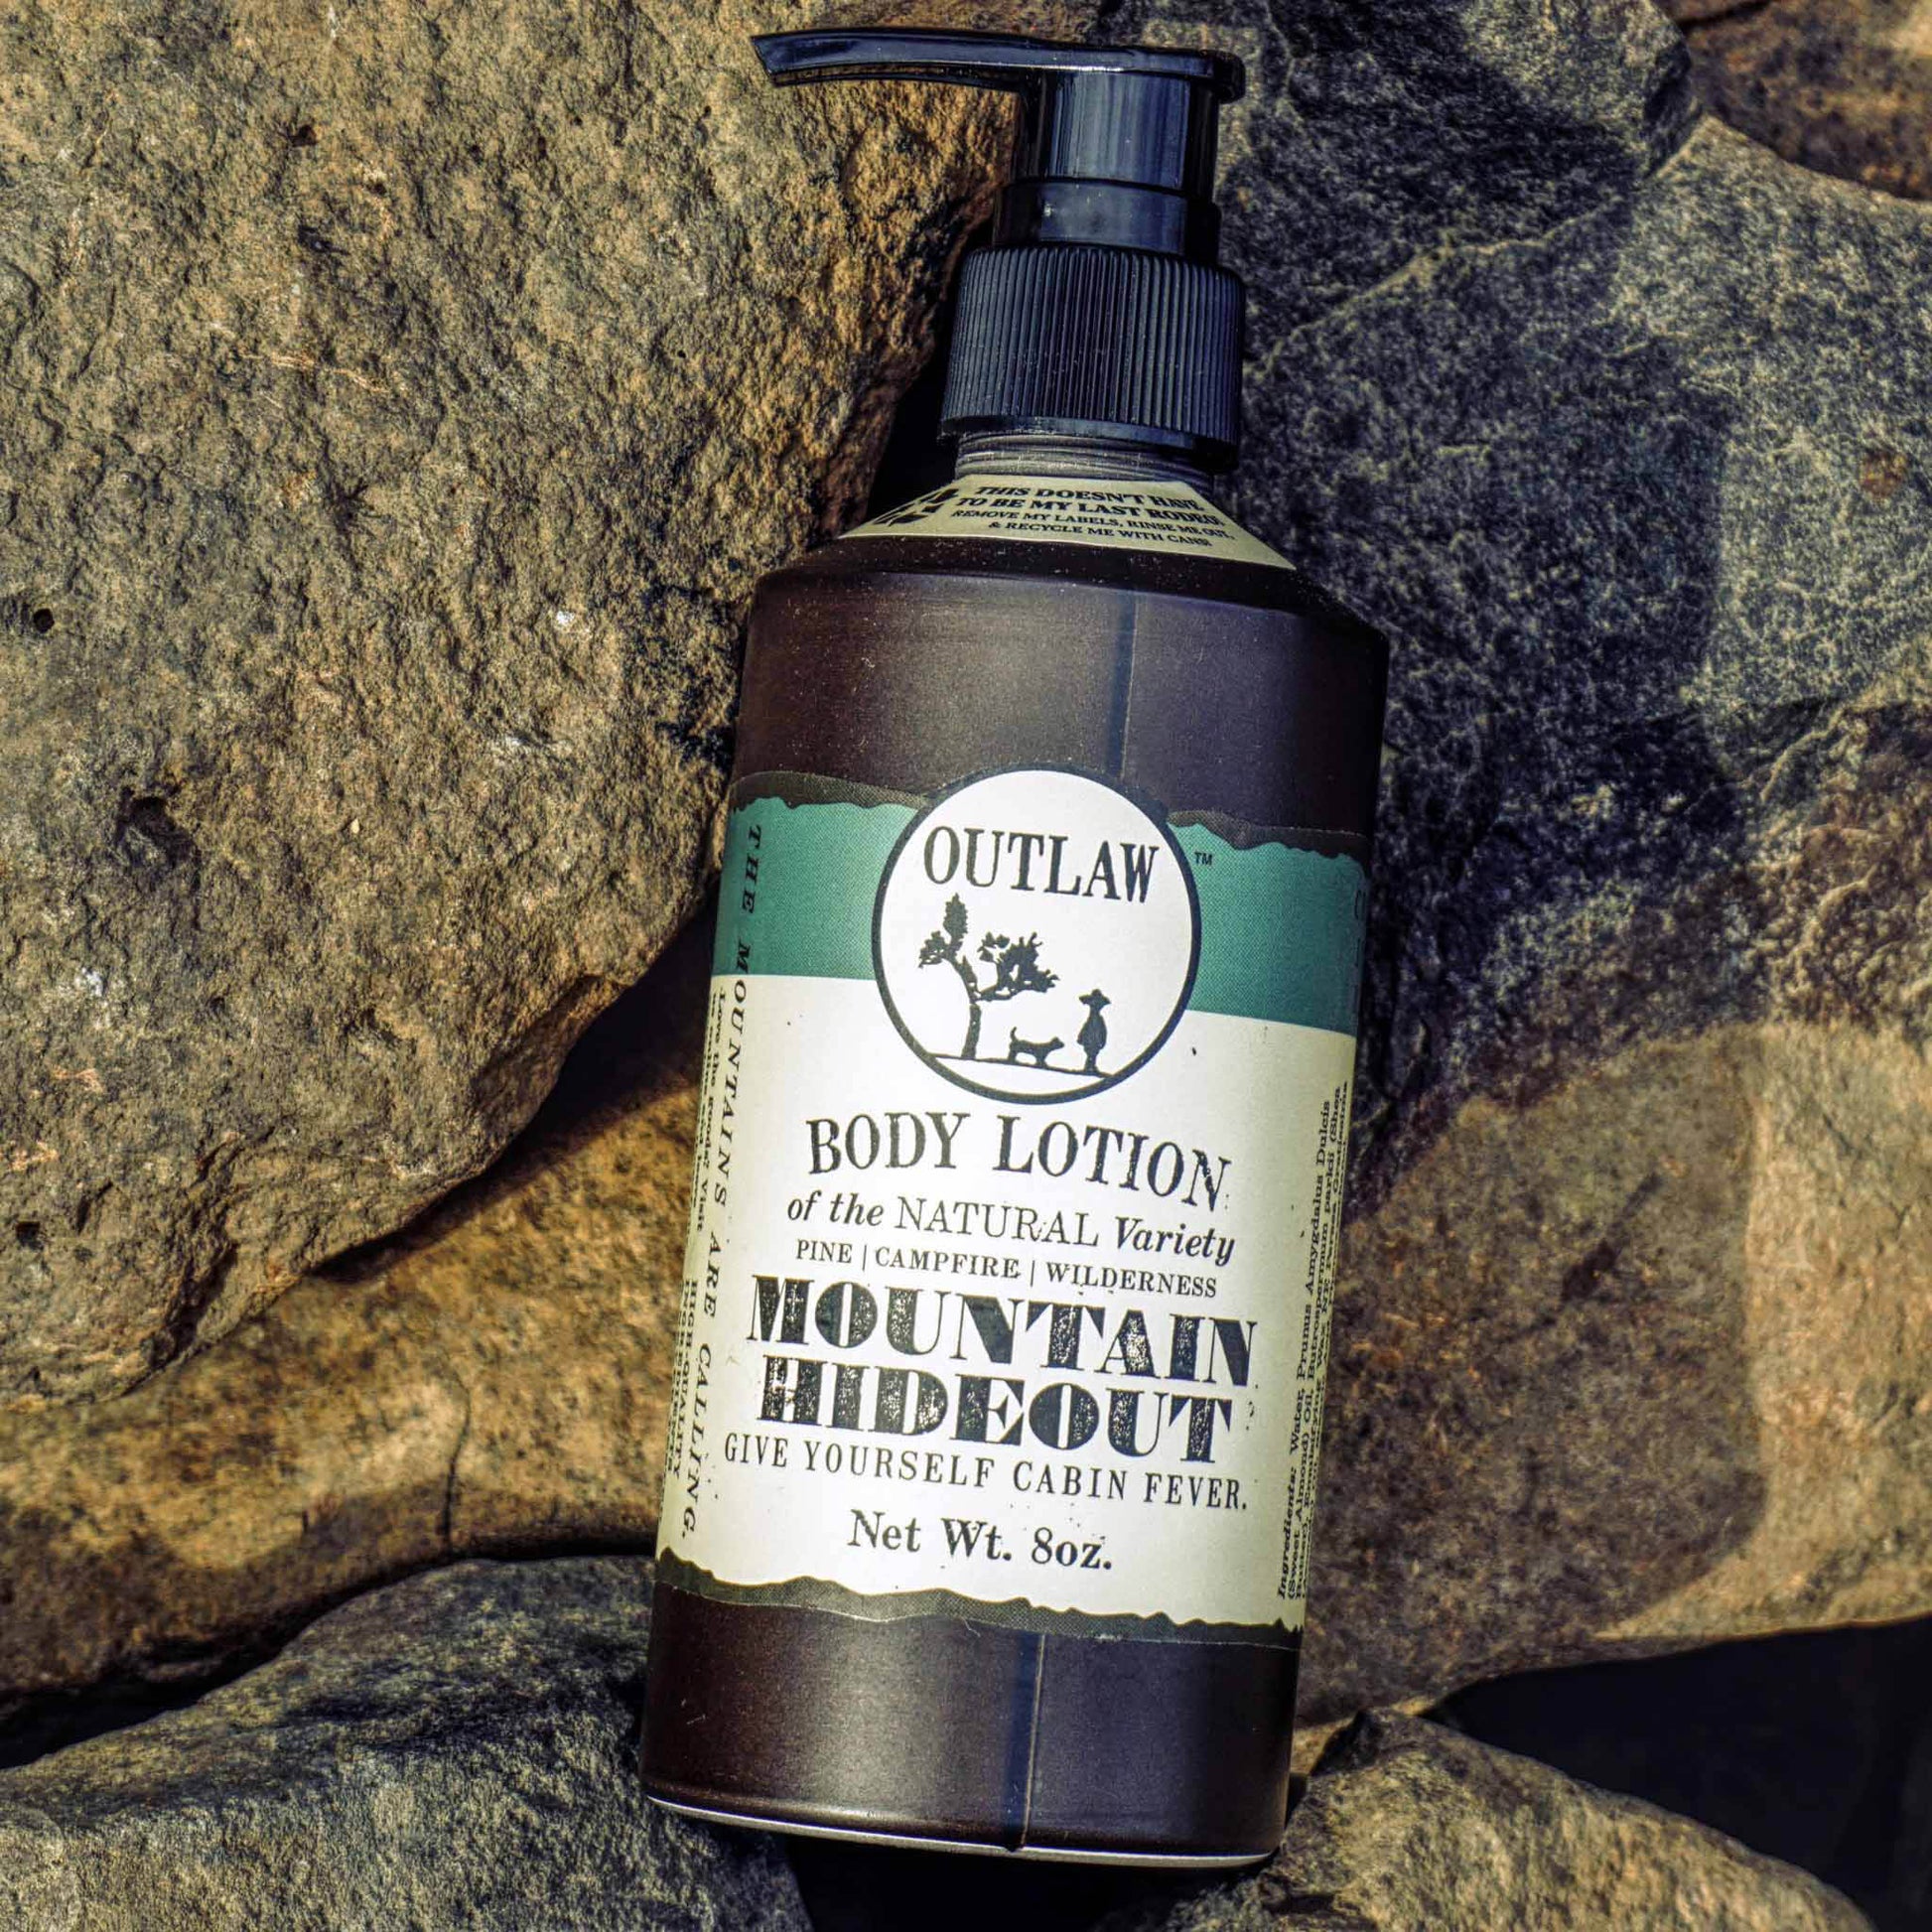 Pine and campfire scented natural body lotion by Outlaw